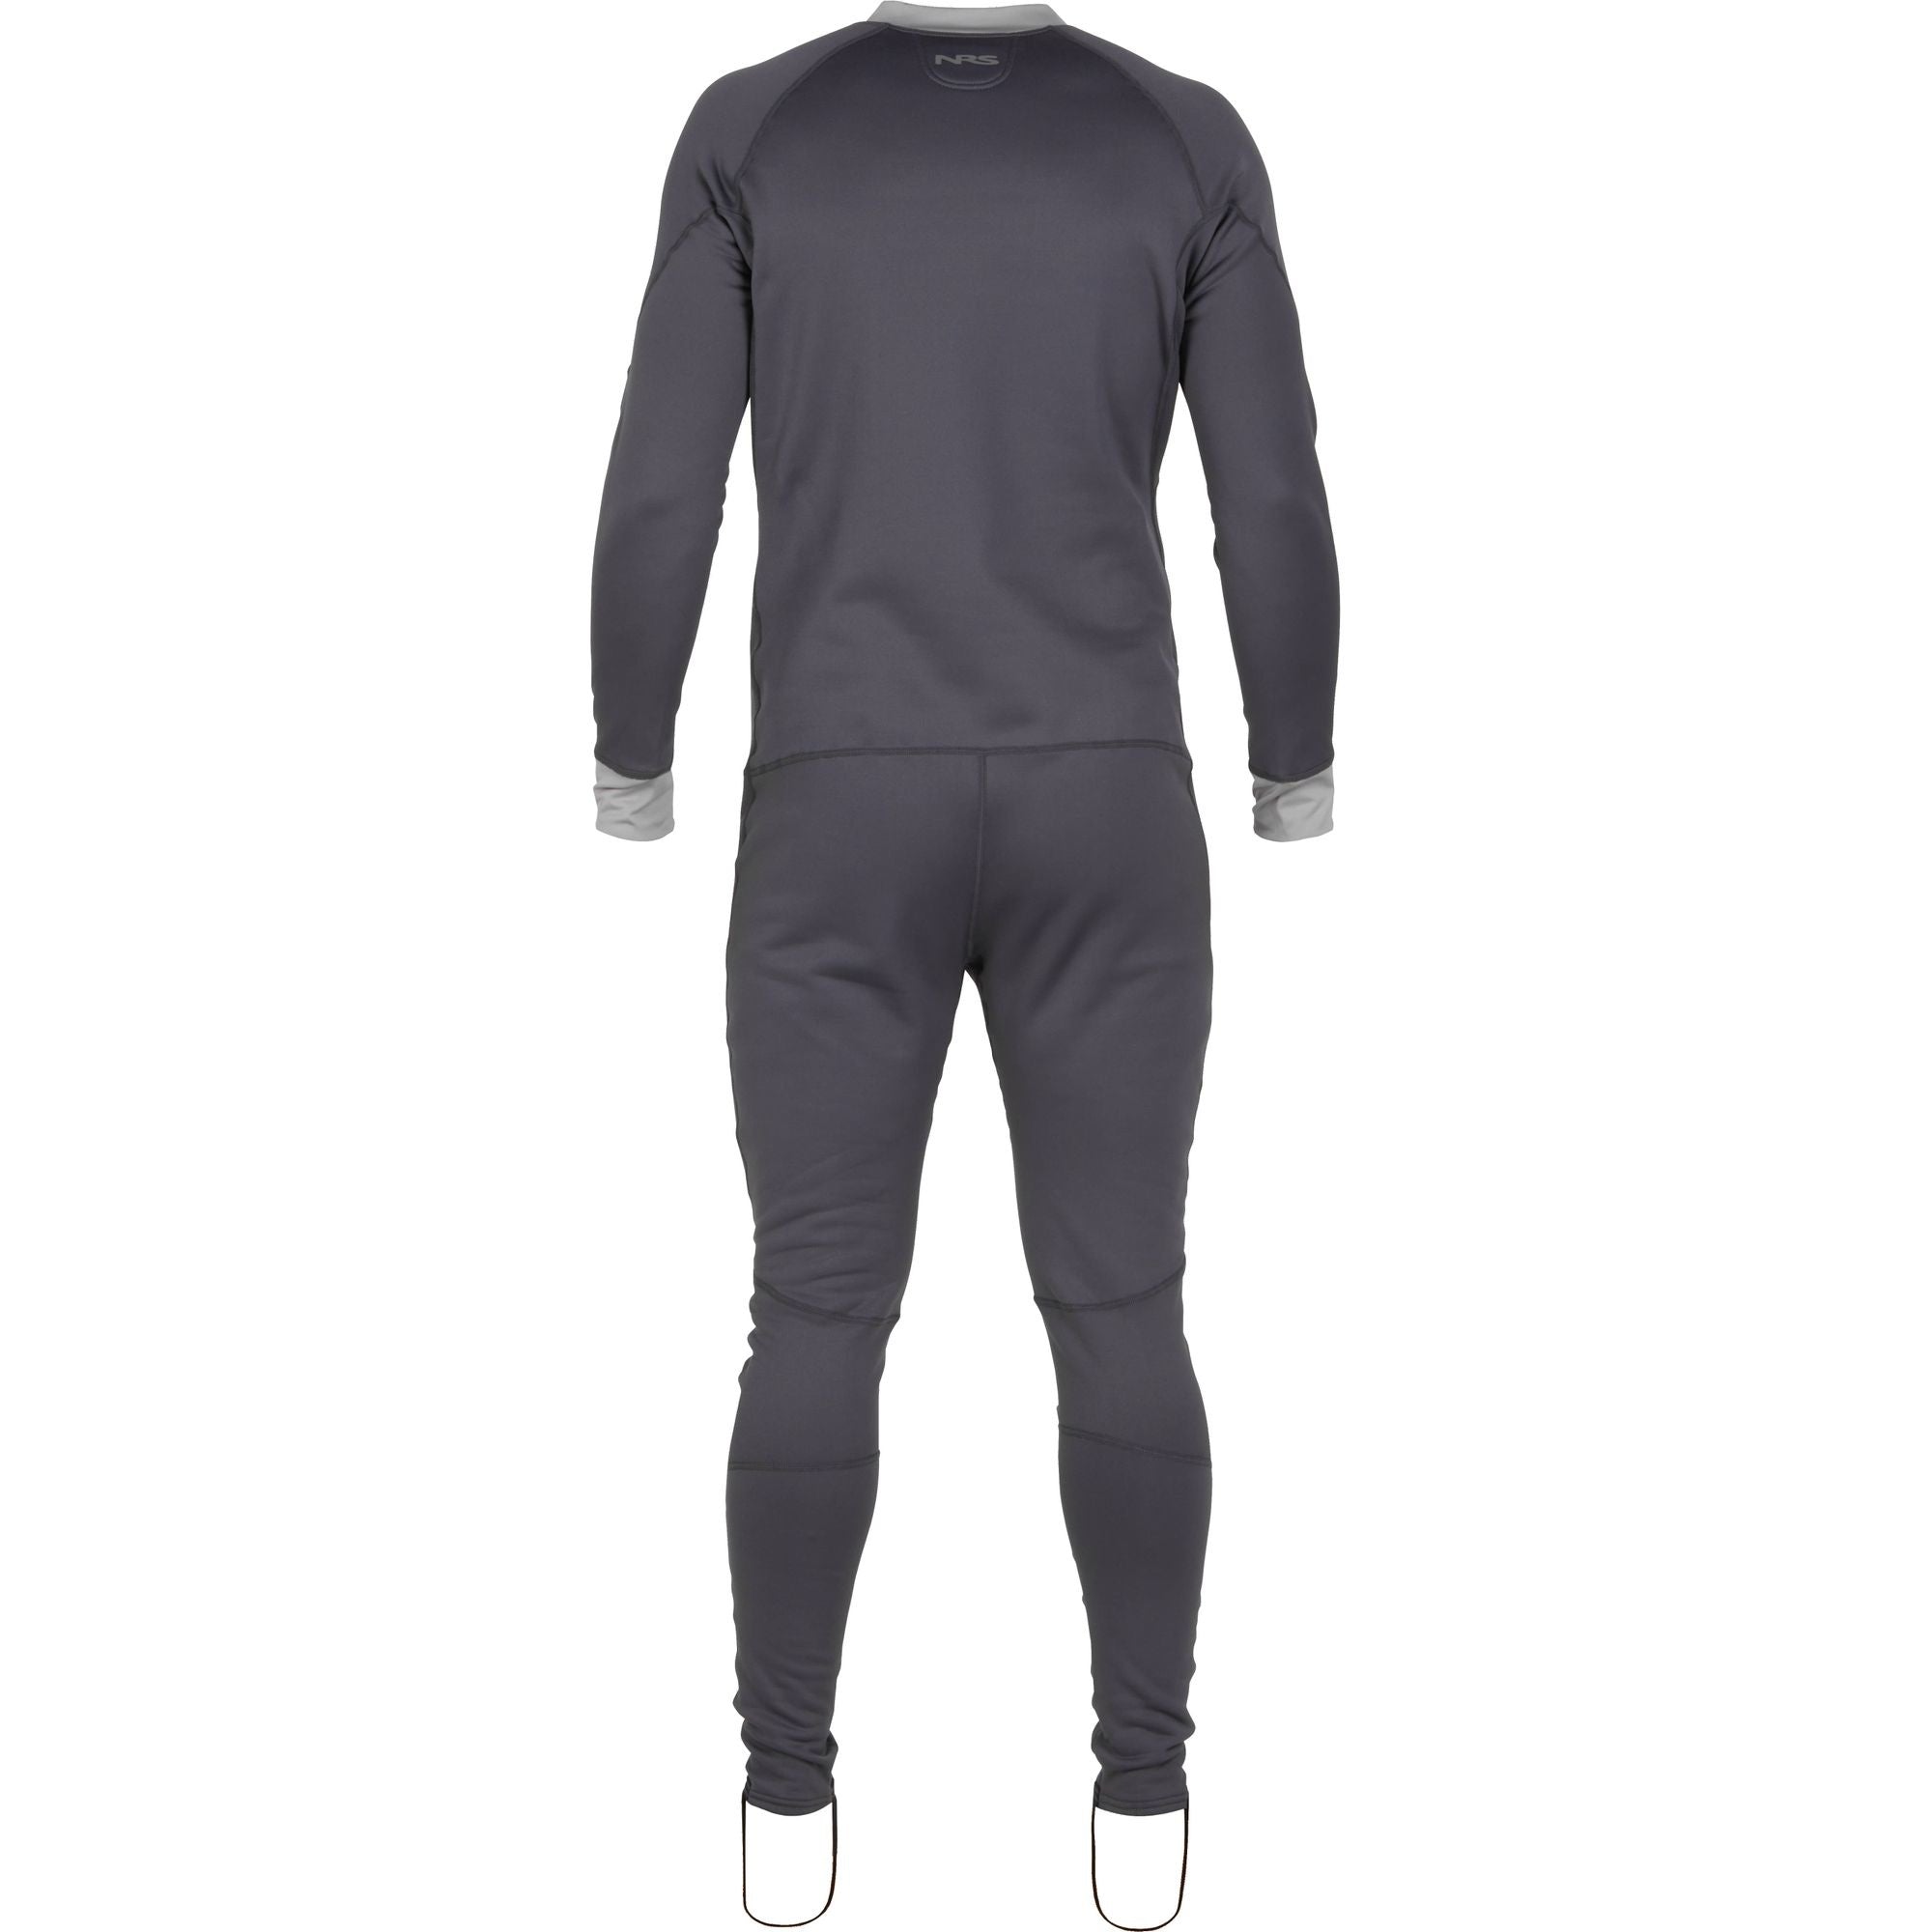 NRS - Mens Expedition Weight Union Suit